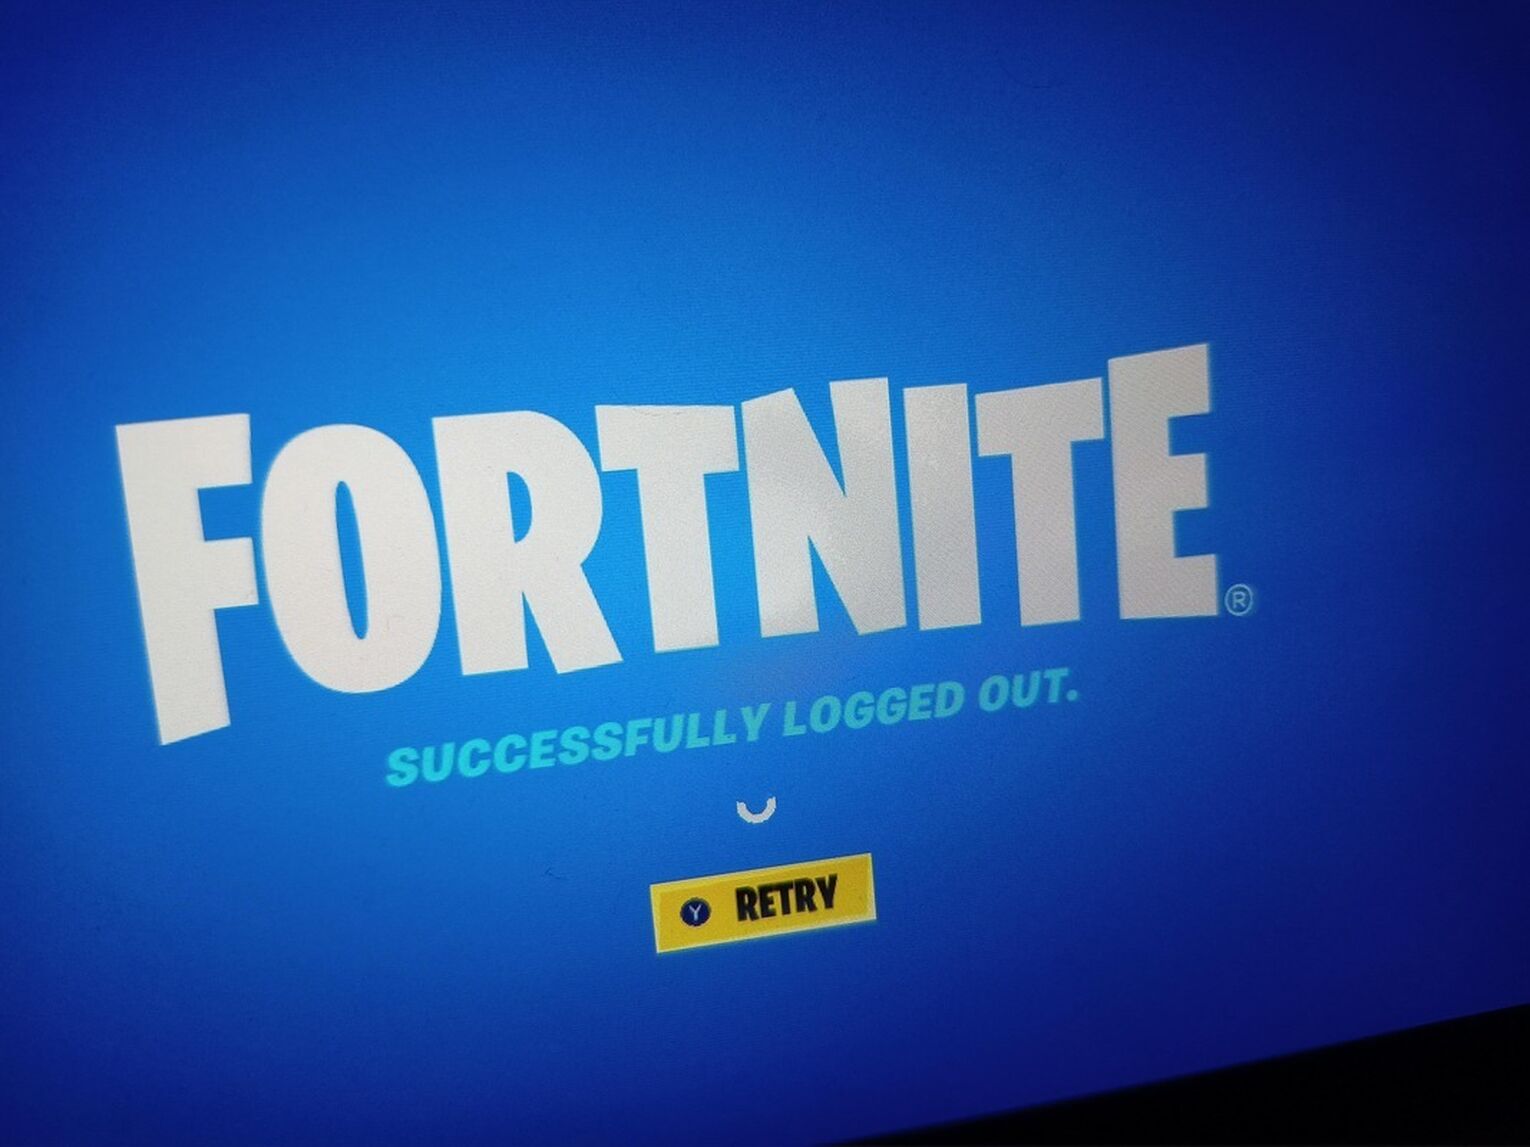 Fortnite Logged Out on PC